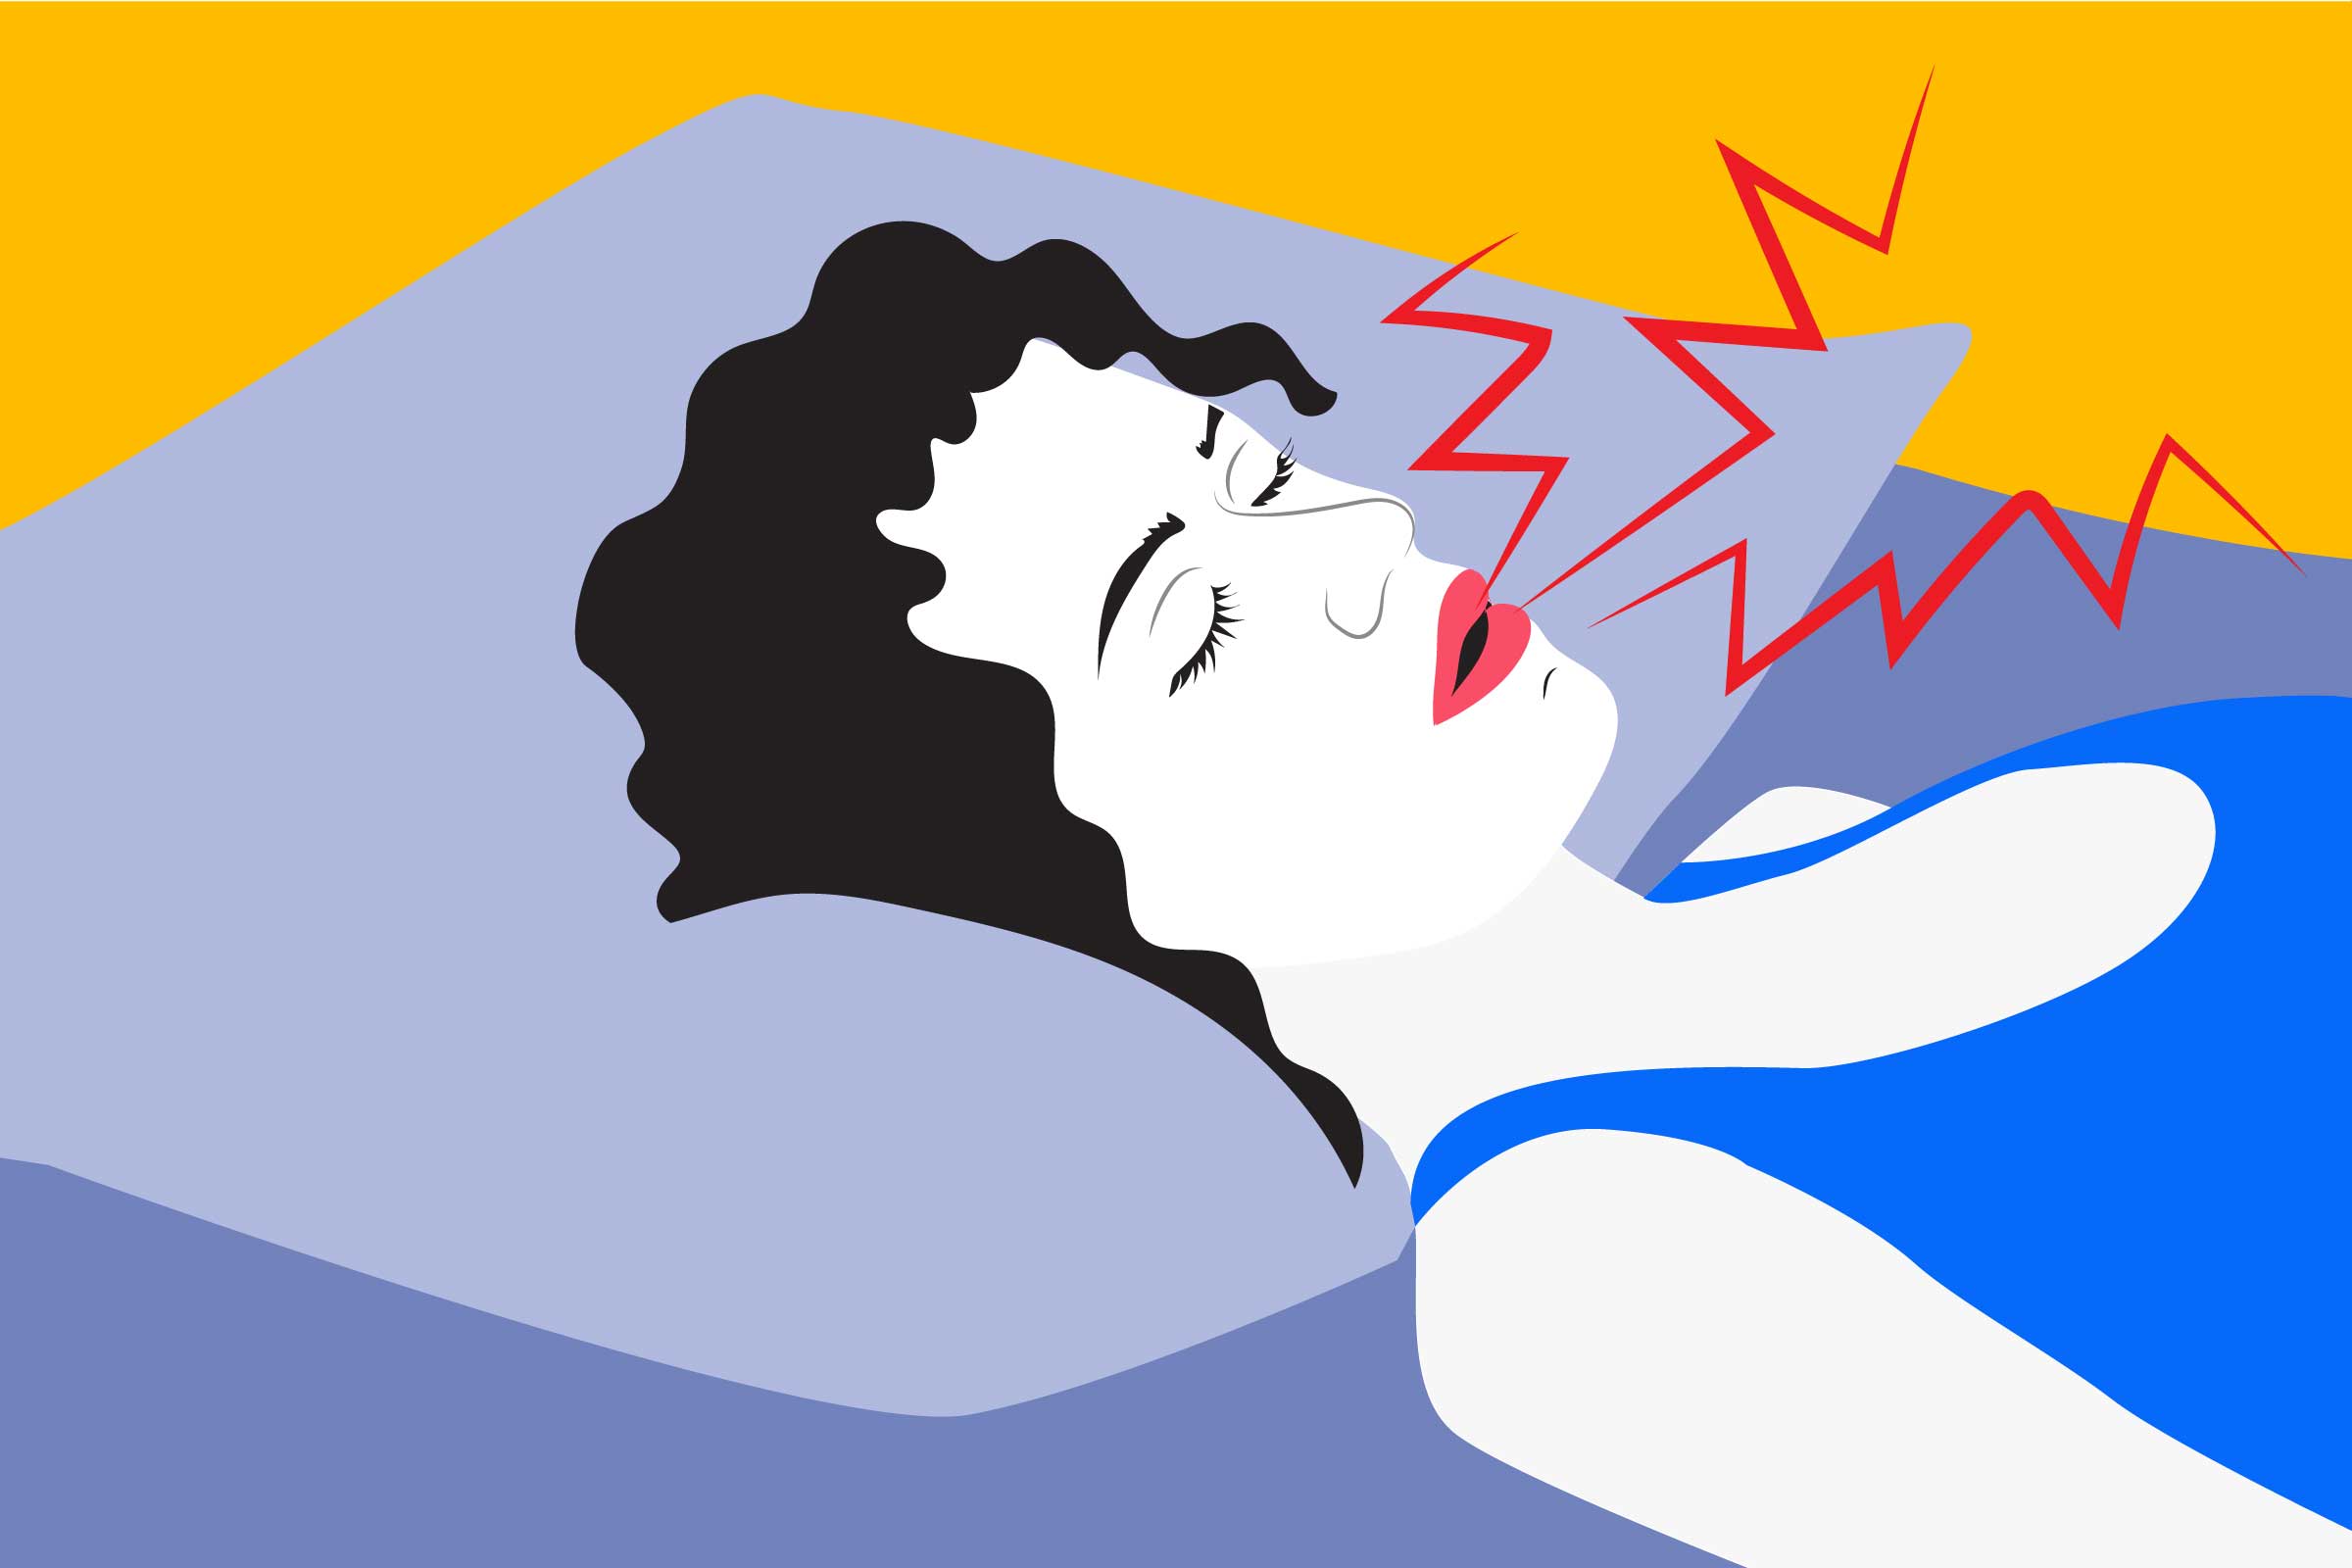 Cartoon shows a woman sleeping. There are red sound waves coming out of her mouth